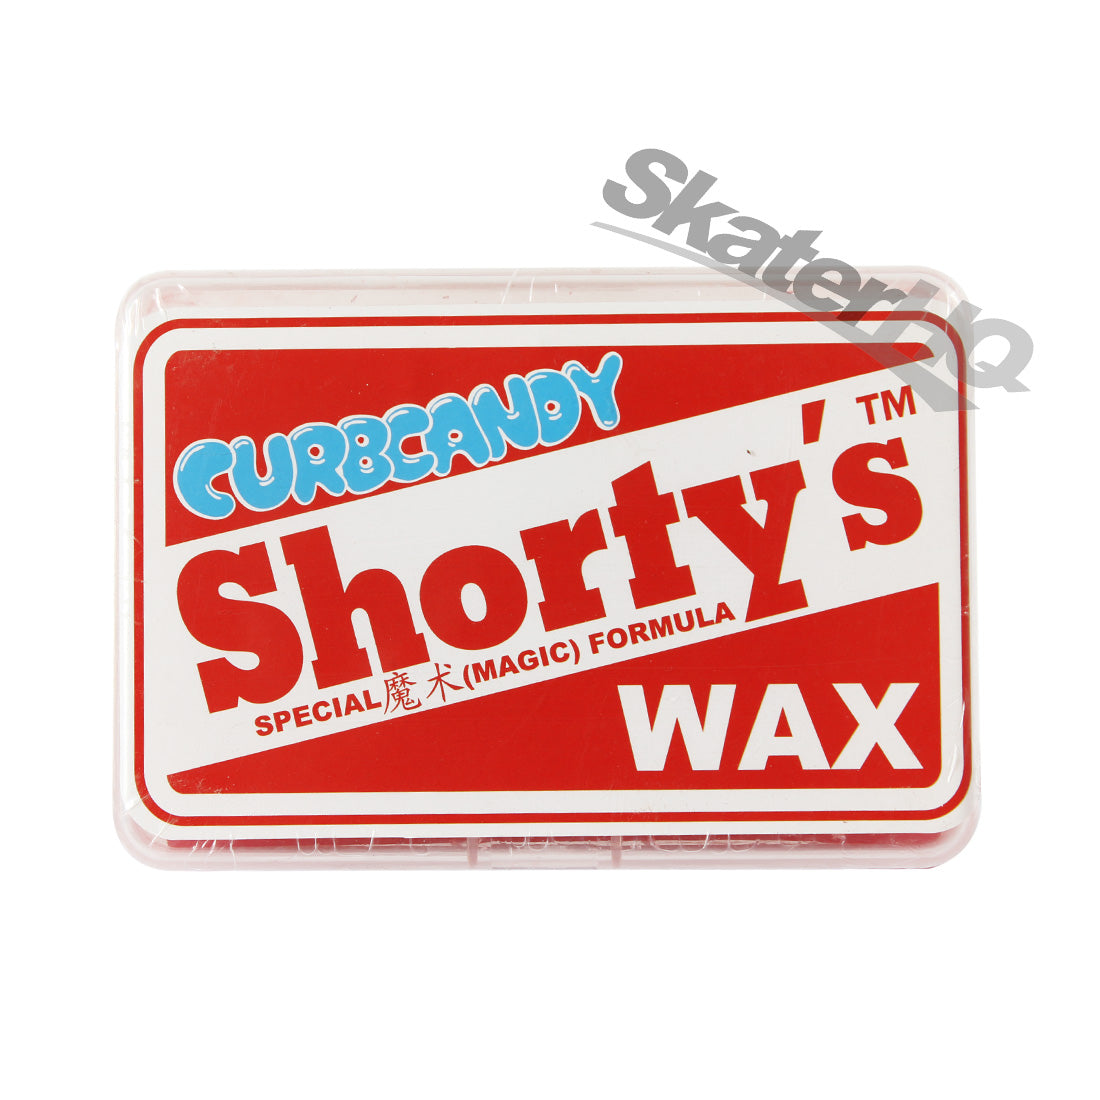 Shortys CurbCandy Wax Bar - Red Skateboard Accessories